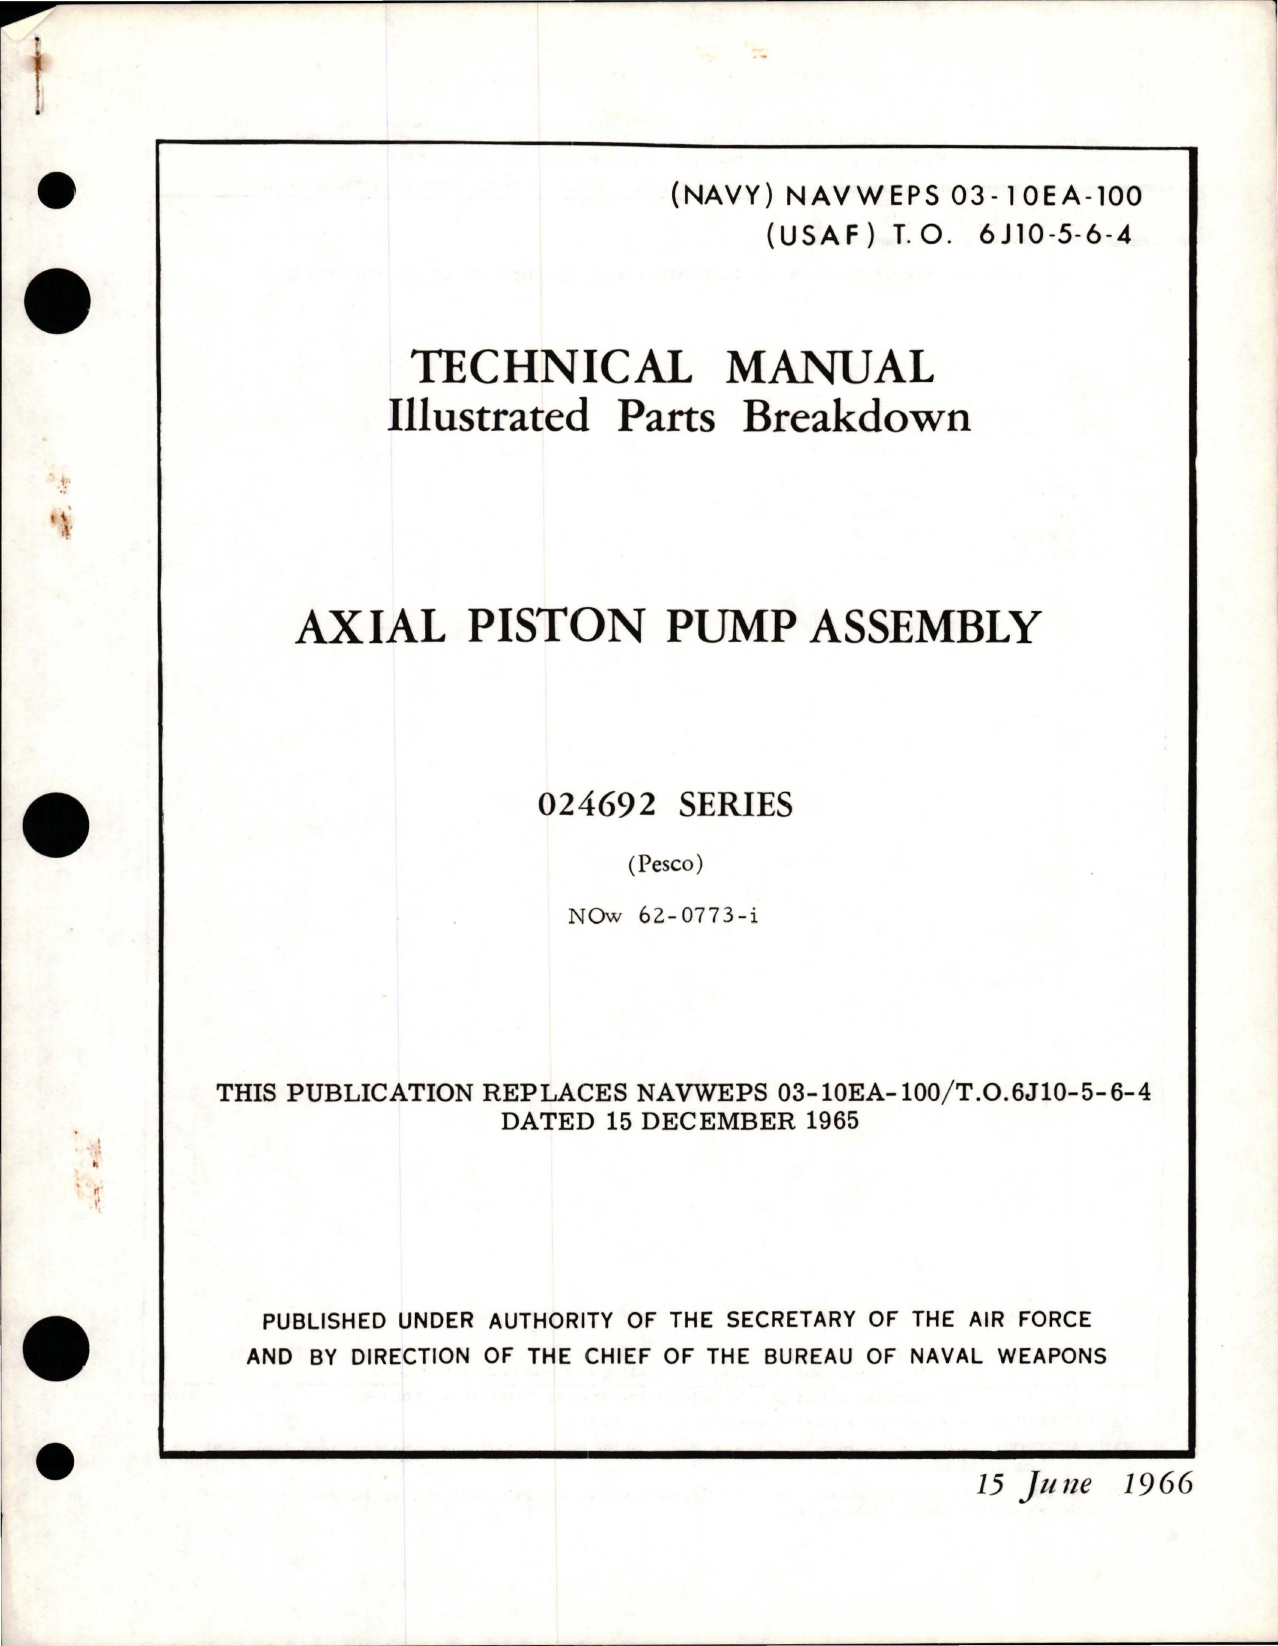 Sample page 1 from AirCorps Library document: Illustrated Parts Breakdown for Axial Piston Pump Assembly - 024692 Series